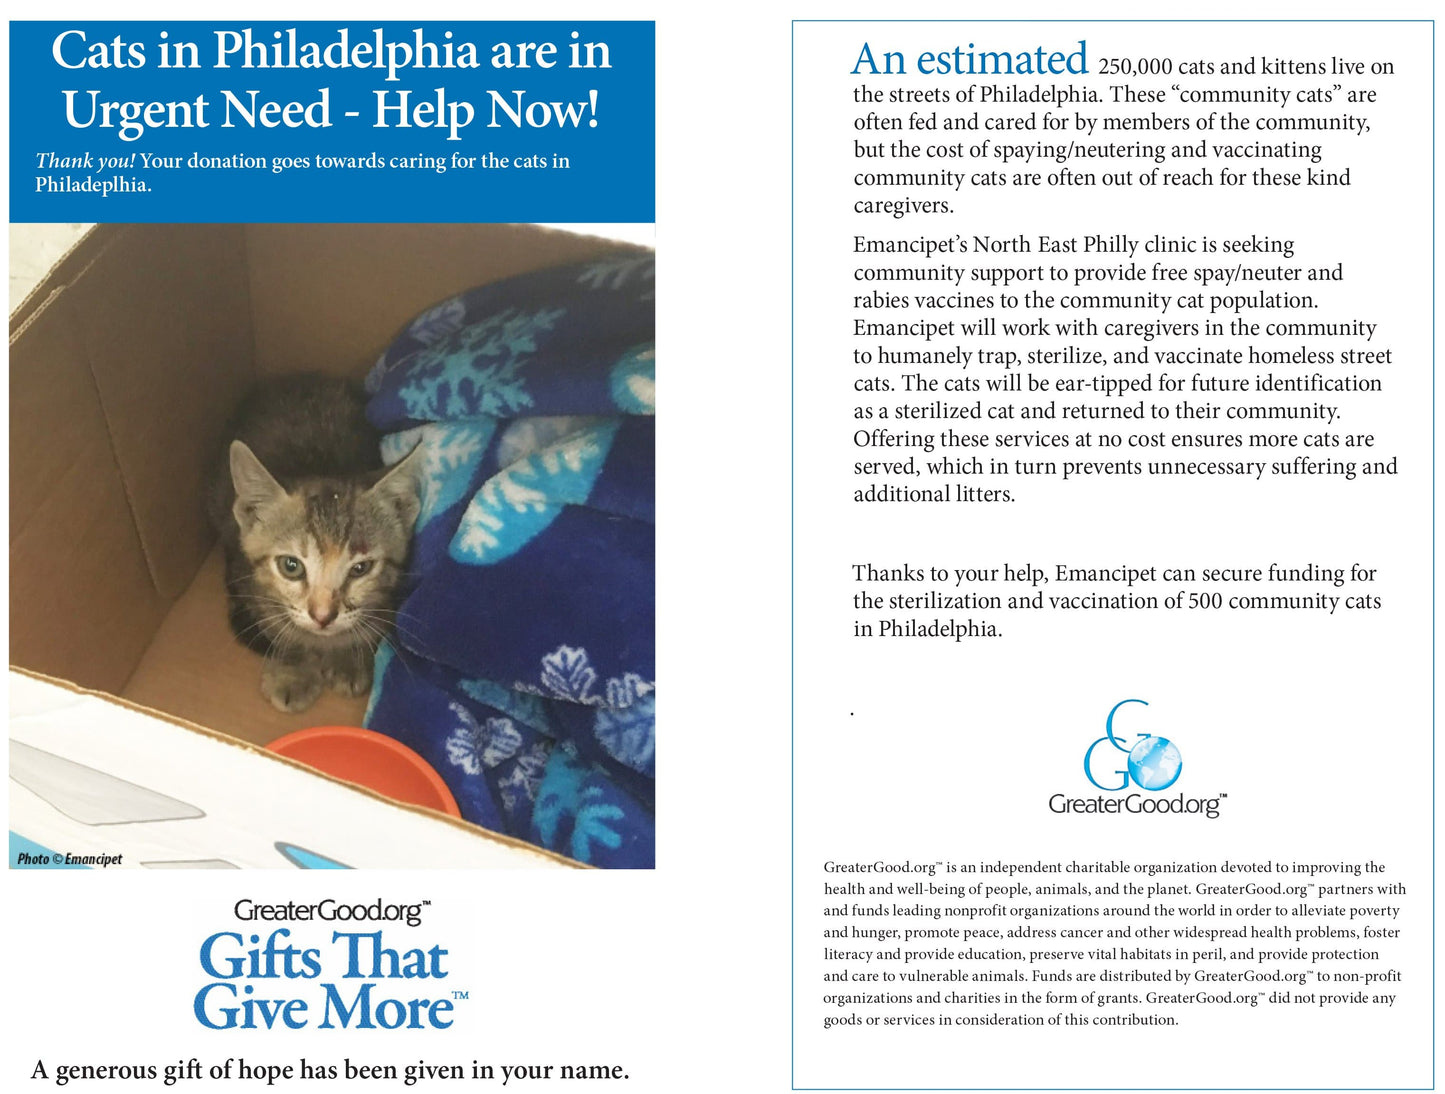 Cats in Philadelphia are in Urgent Need - Help Now!